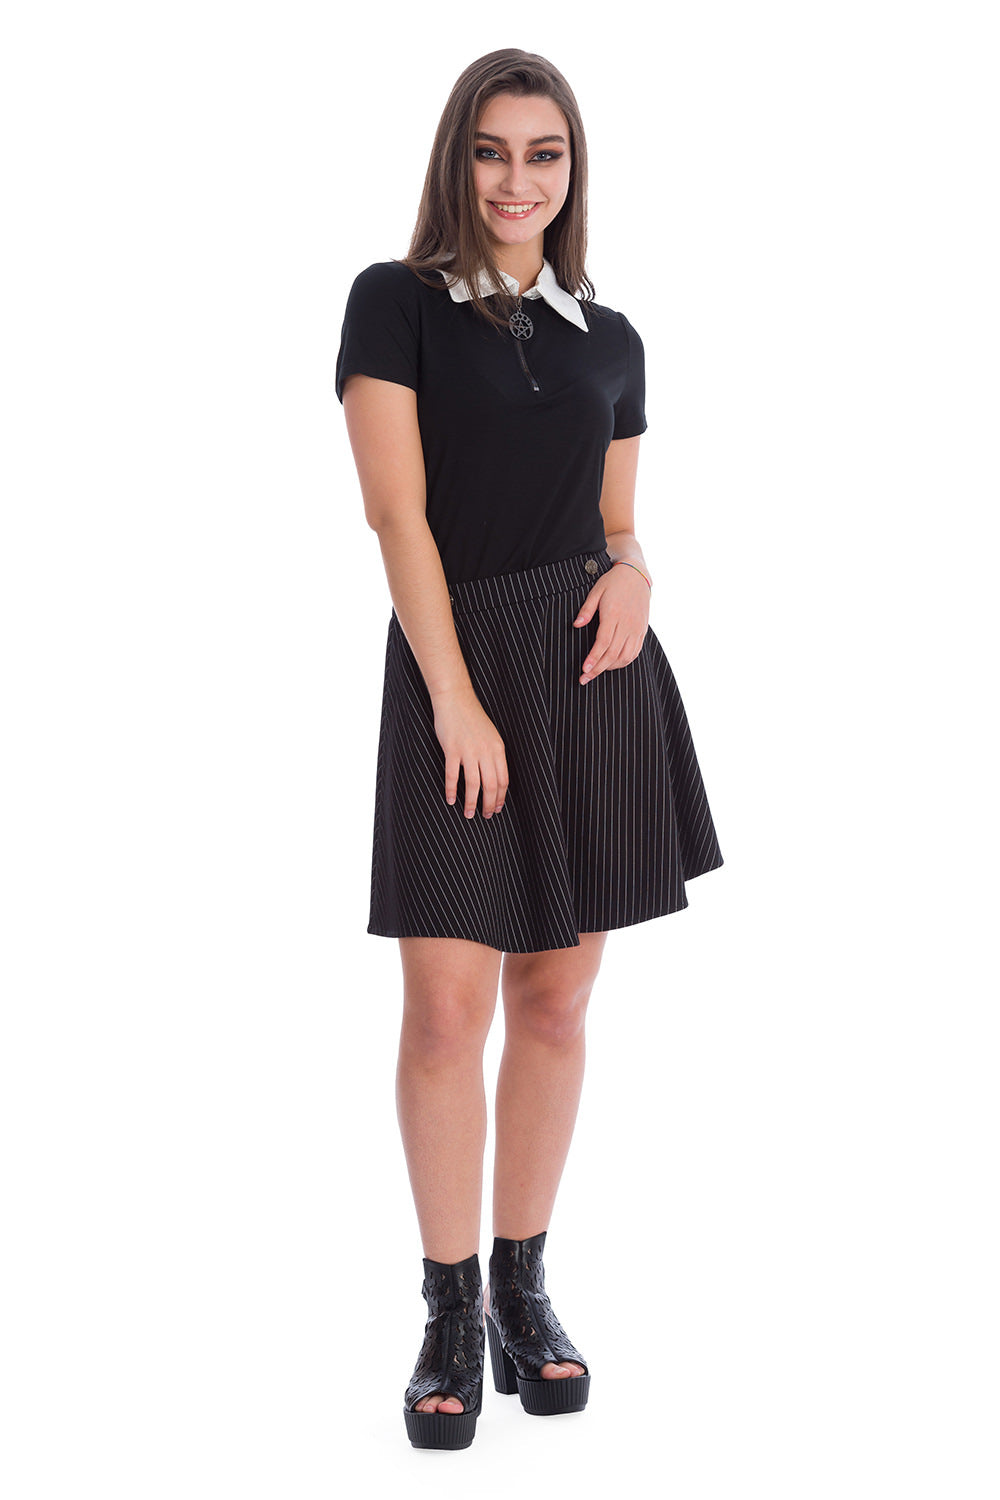 Model in black short sleeve top with white collar and pentagram pendant  with pinstripe a line skirt